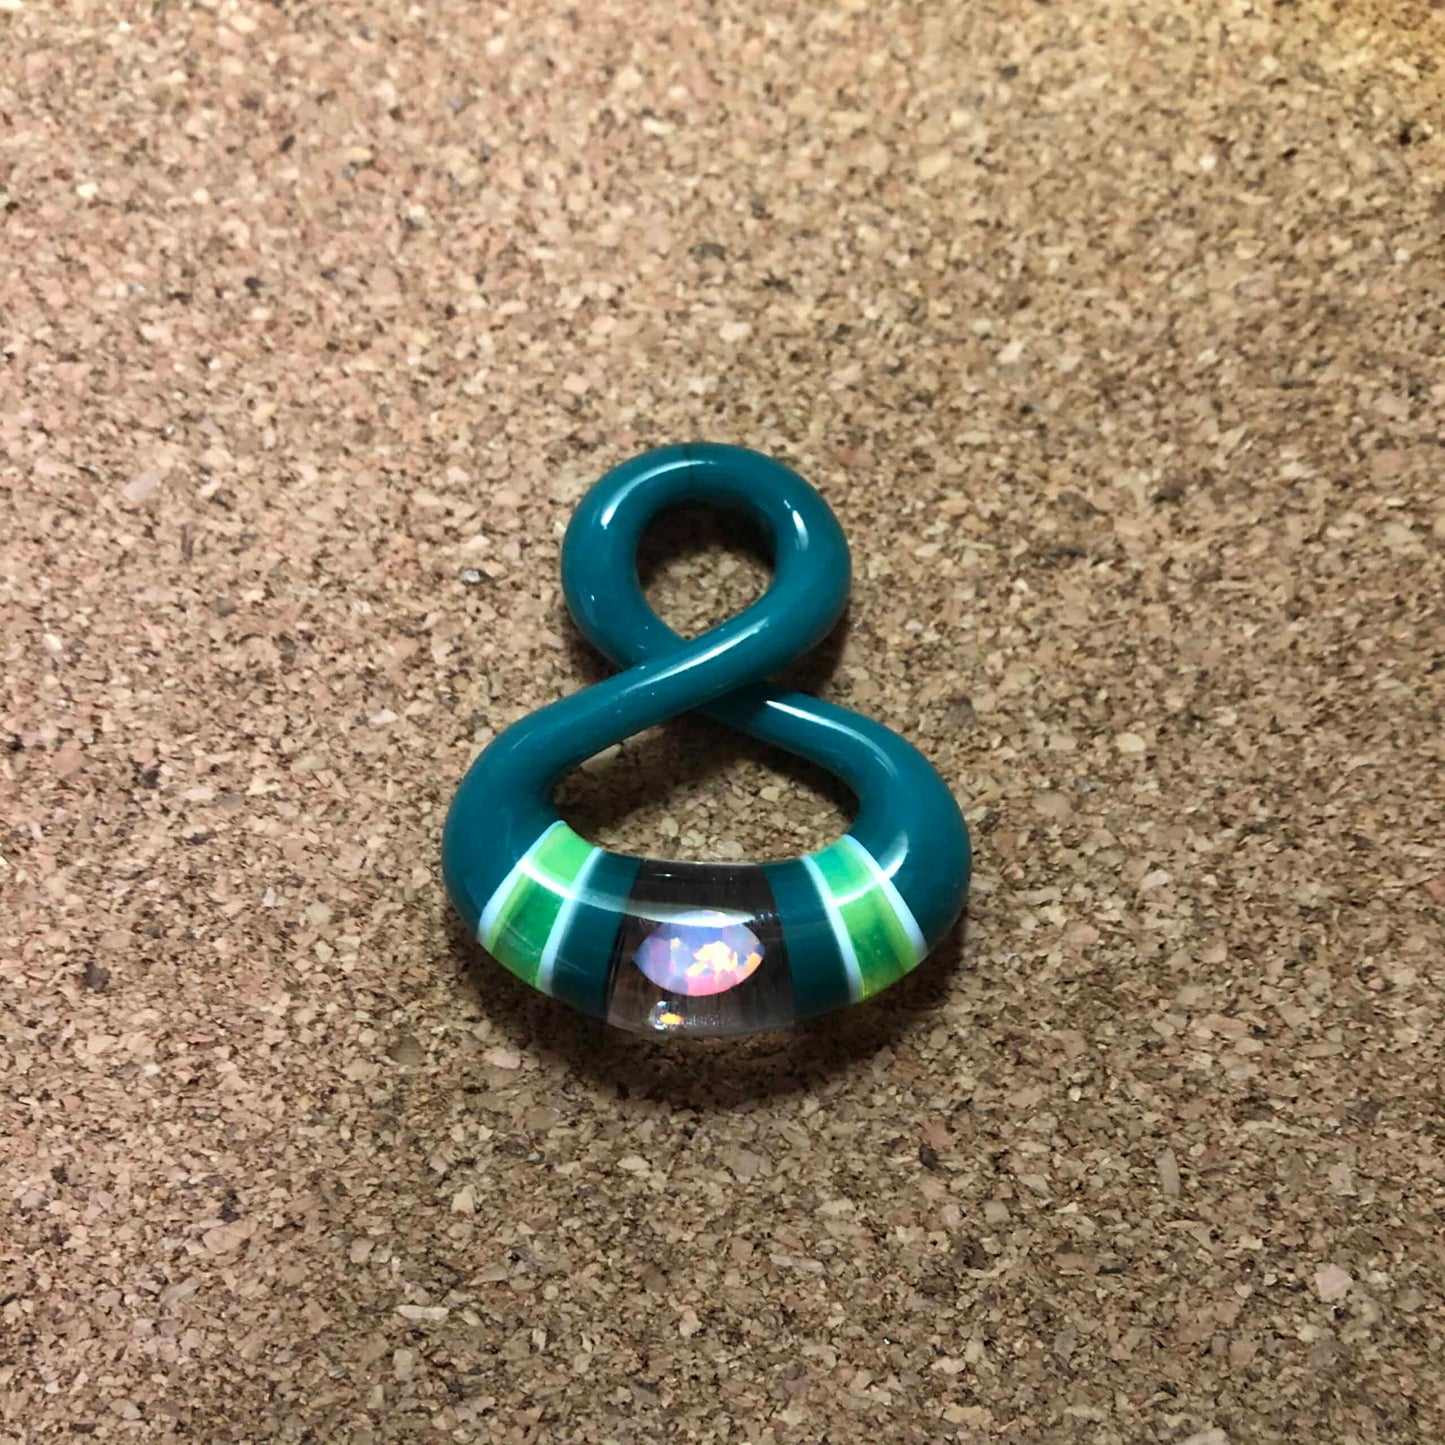 innovative glass pendant - Aqua Azul / Slime / Lotus Worked Full Size Infinity Pendant w/ Marquise Opal by NateyLove